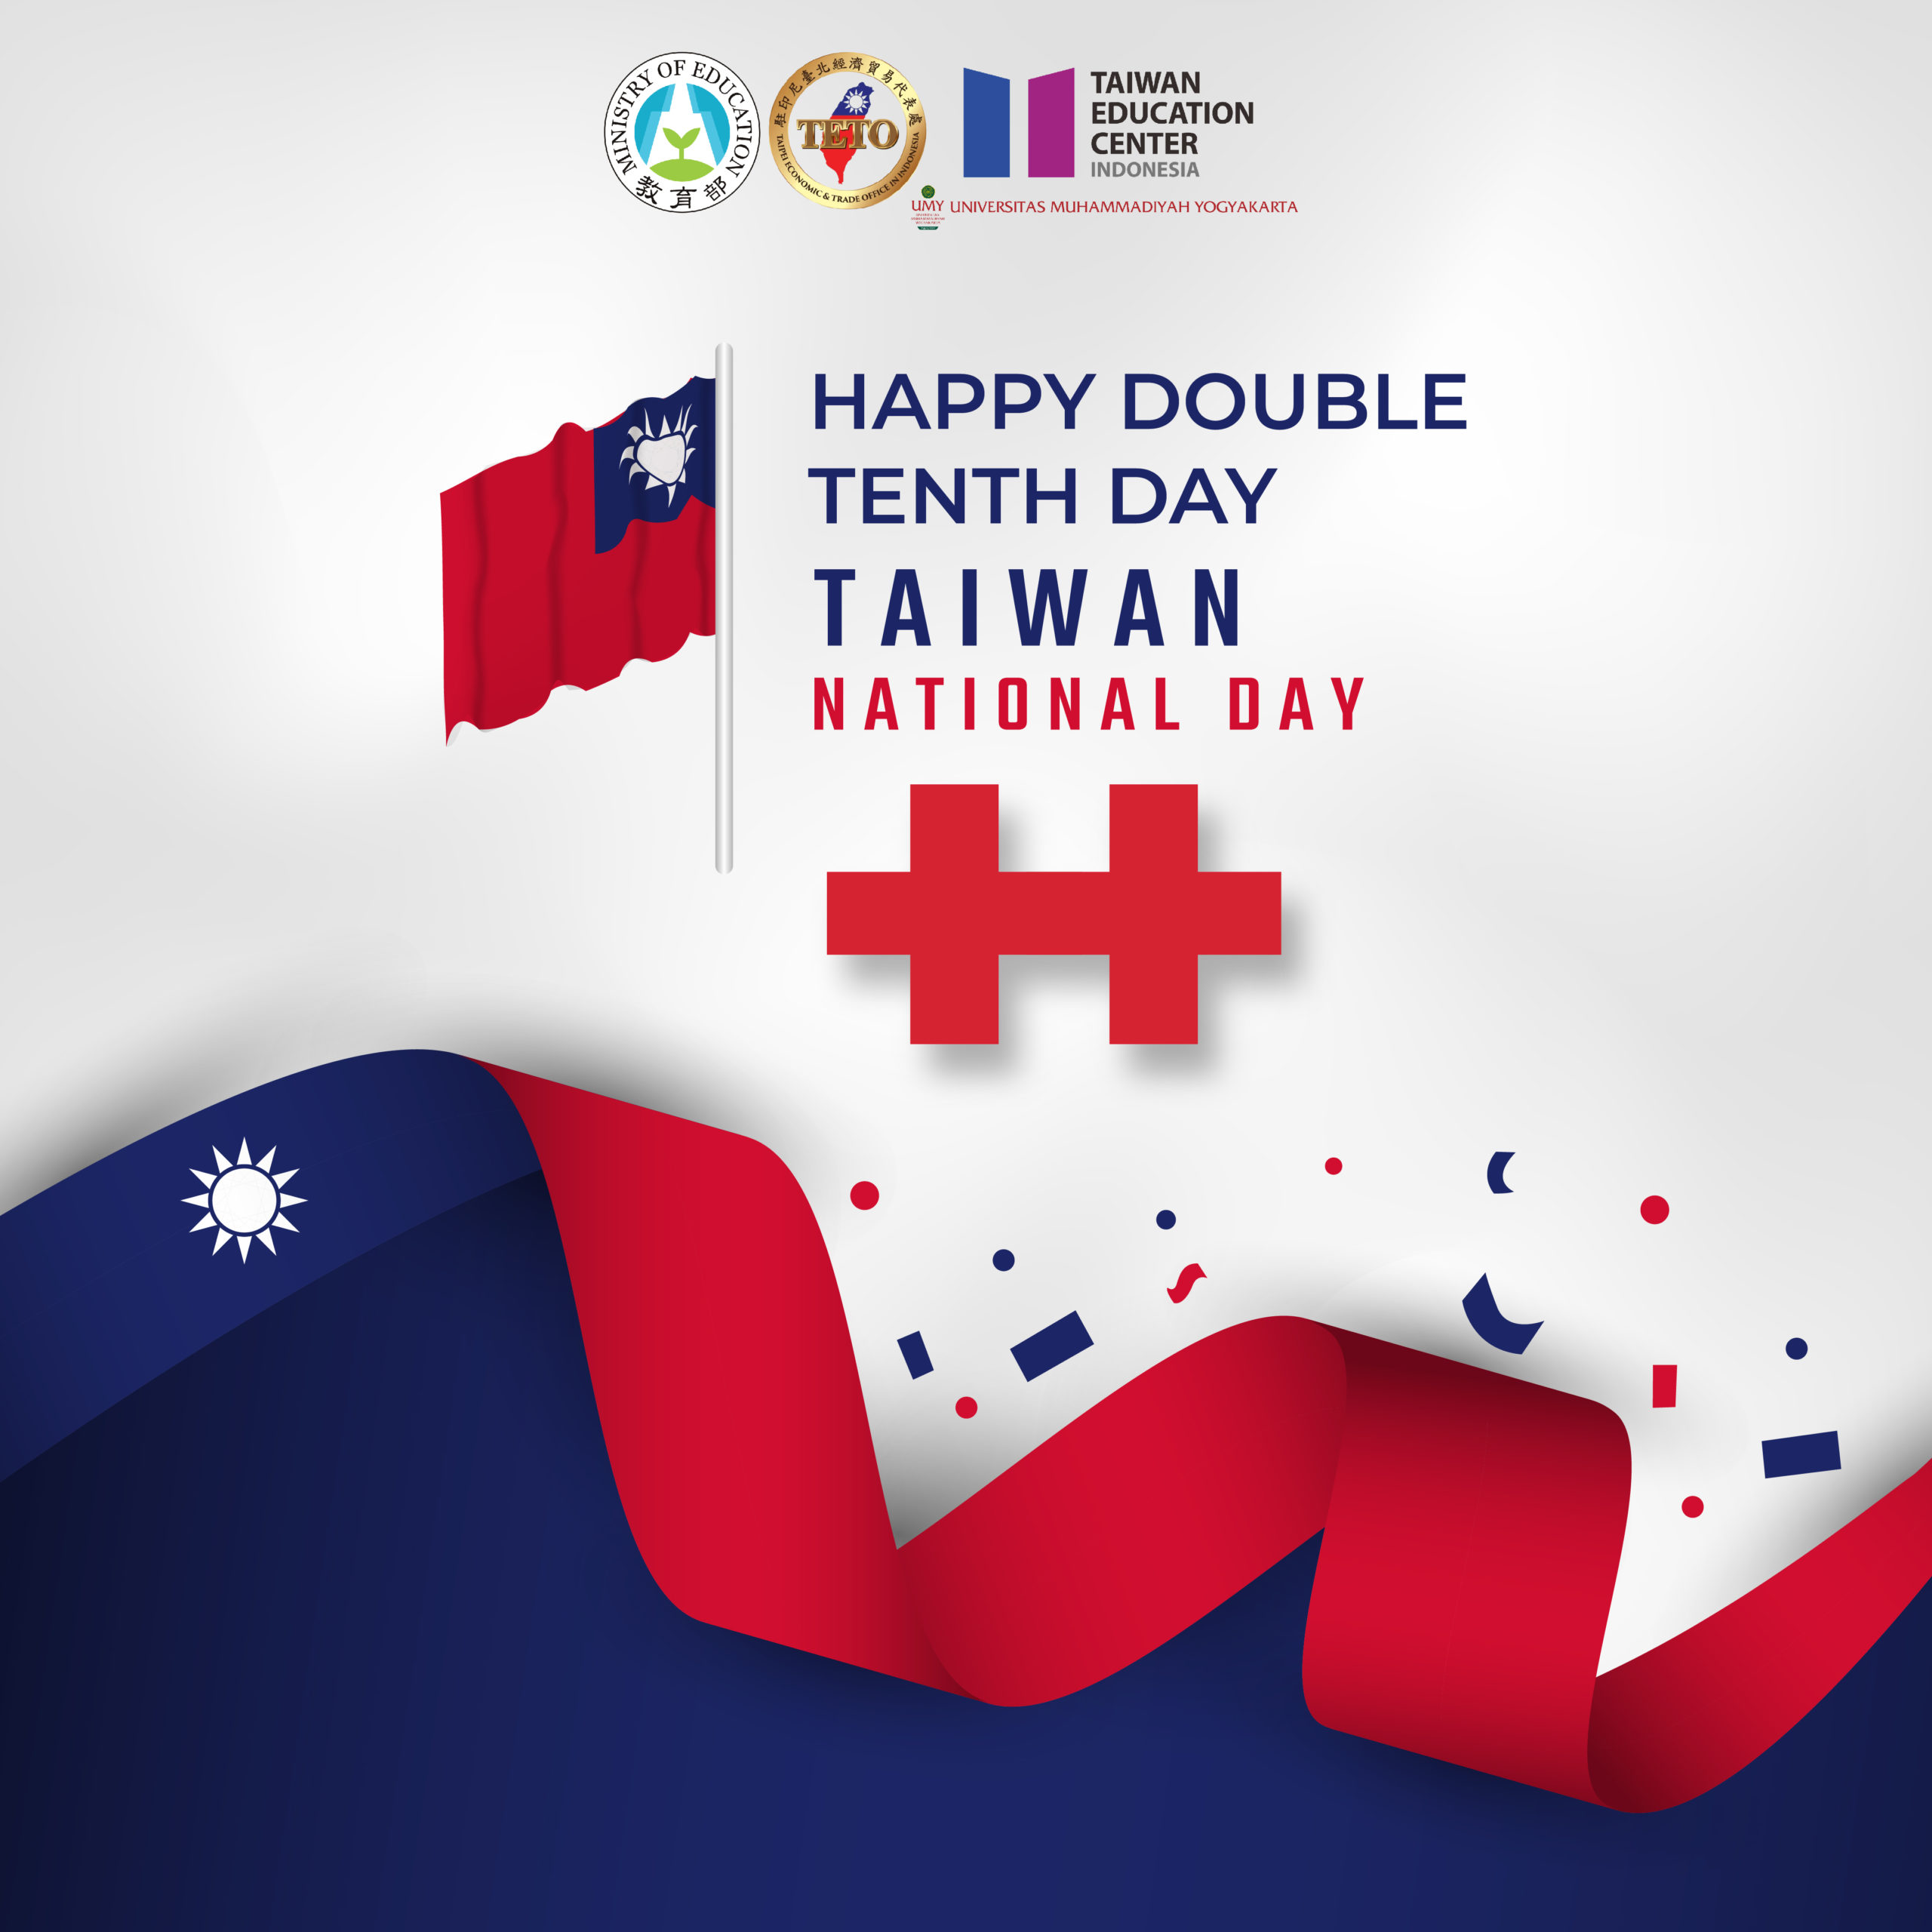 Happy Double Tenth Day National Day Taiwan Taiwan Education Center Umy